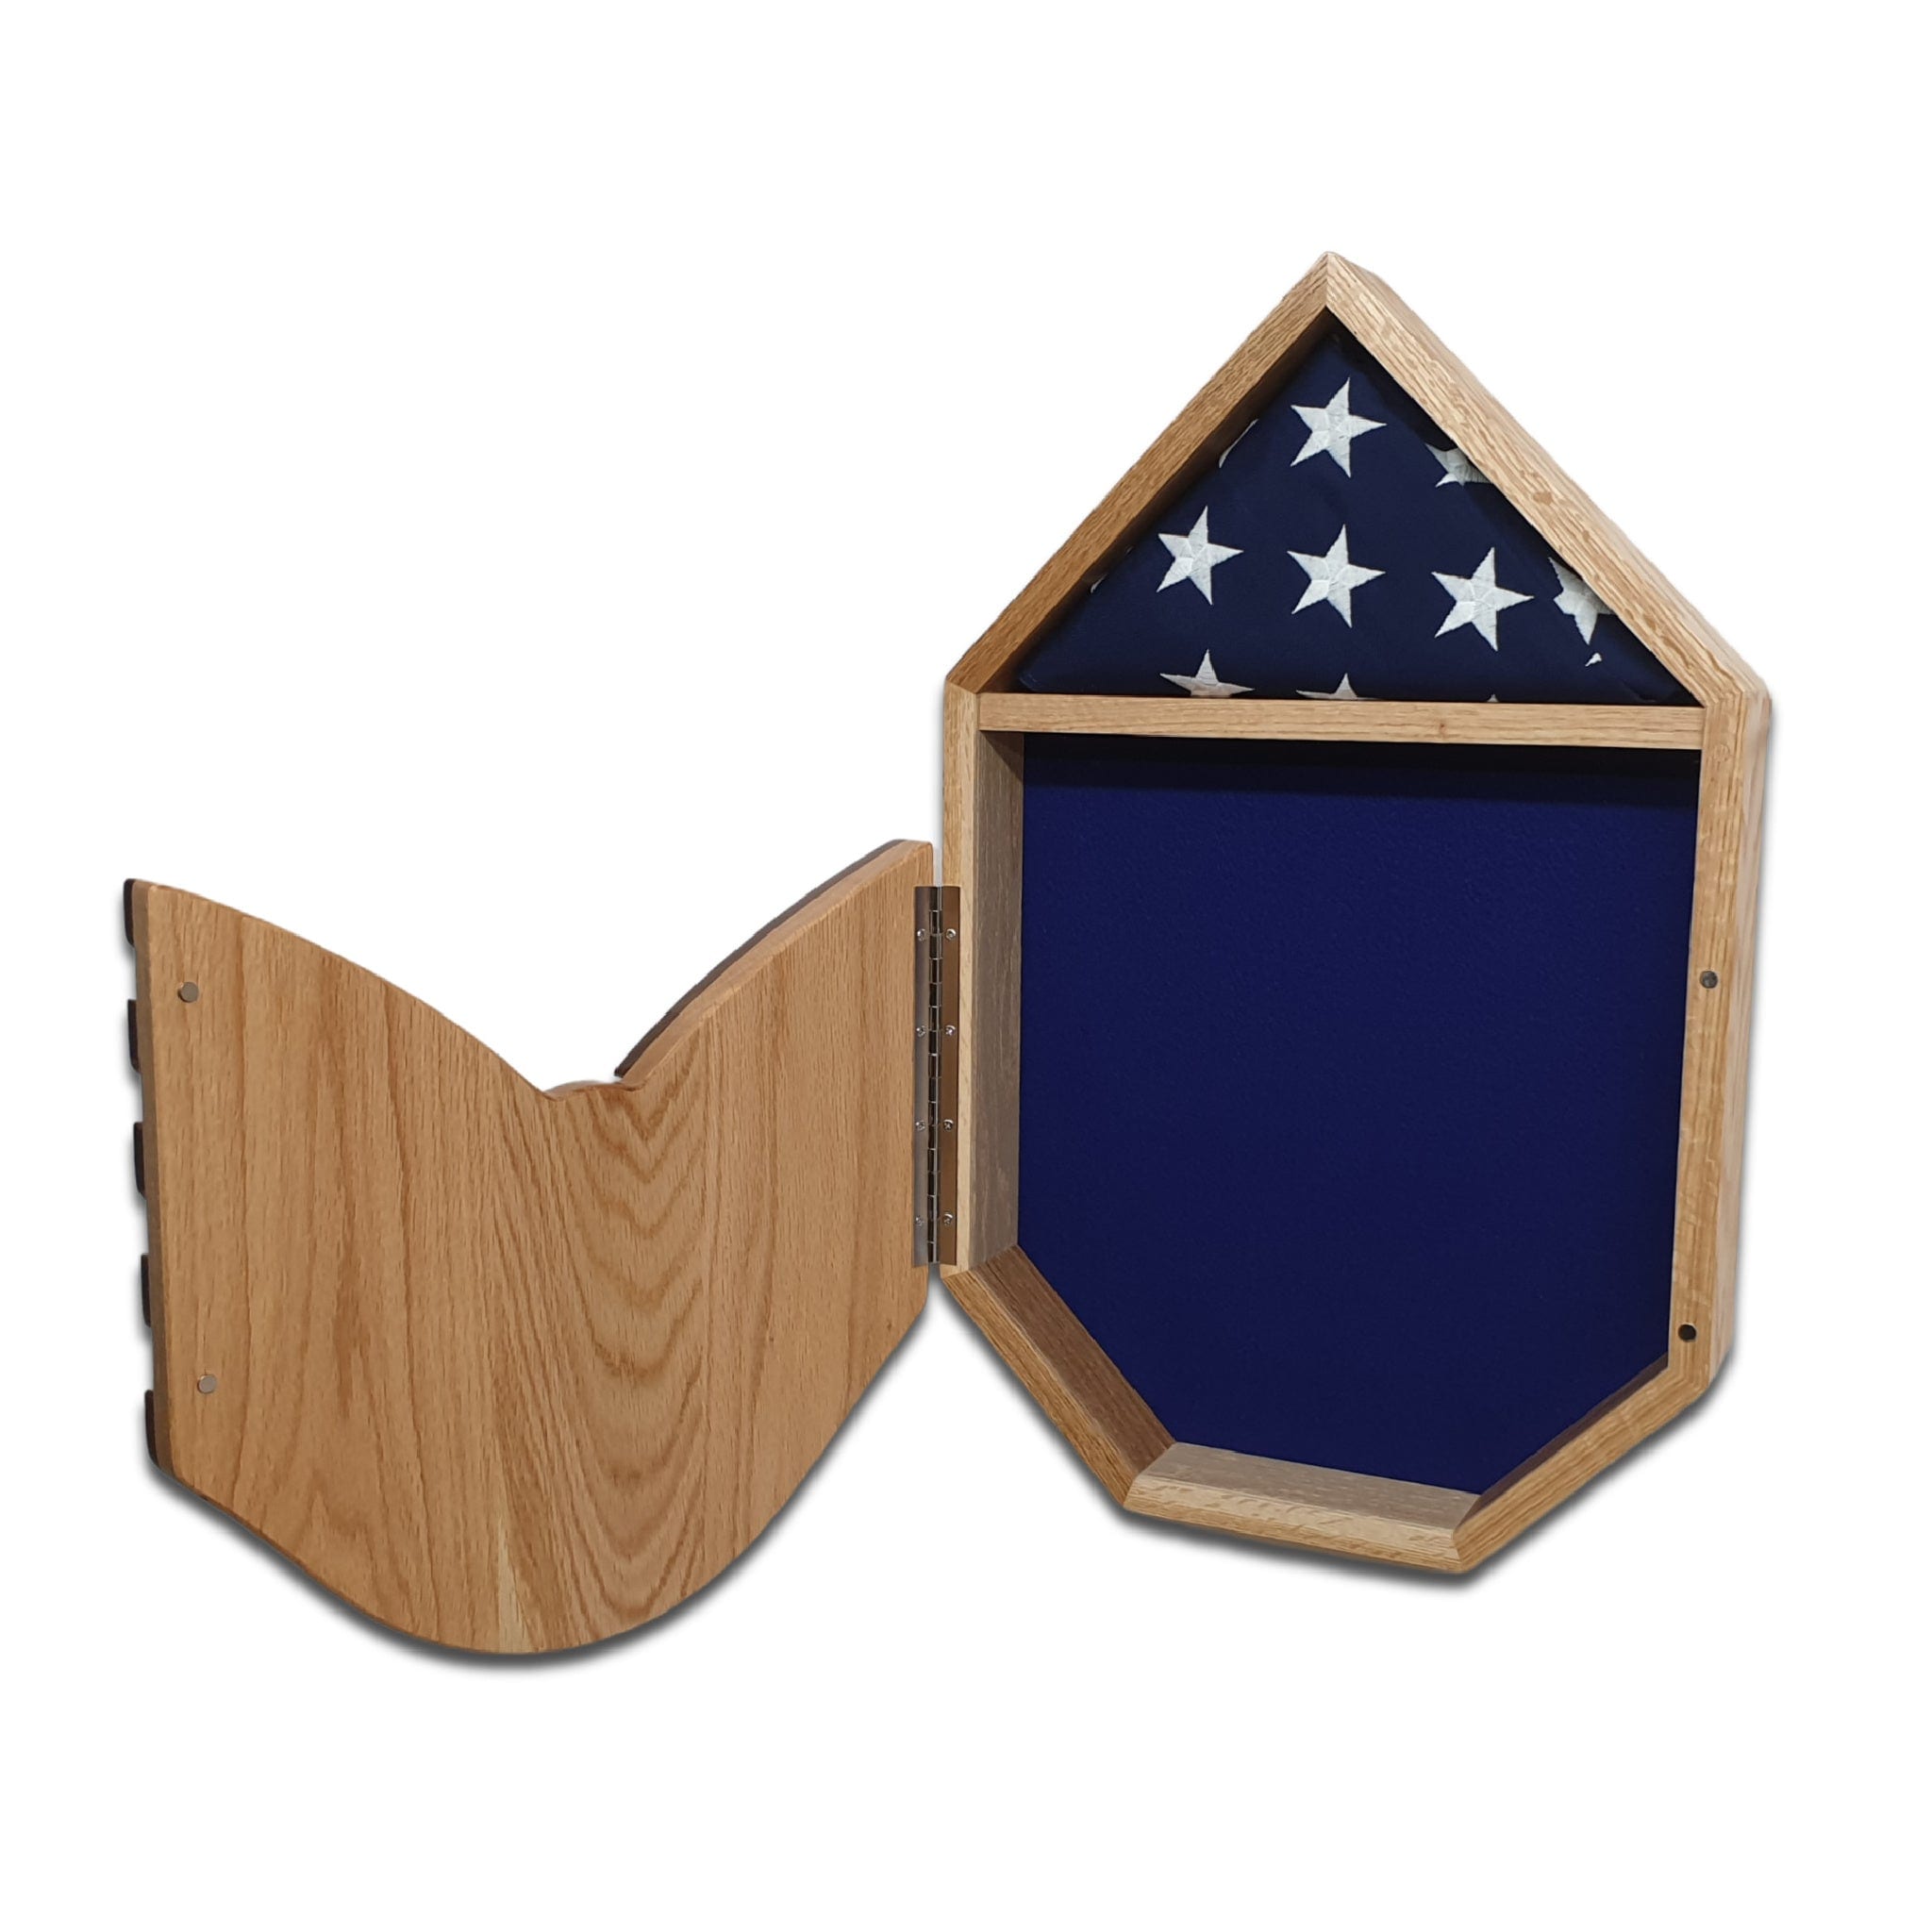 Military retirement shadow box for US Air Force Technical Sergeant. Made of real Oak and Walnut hardwood. Holds a 3'x5' folded flag. Front face opened.